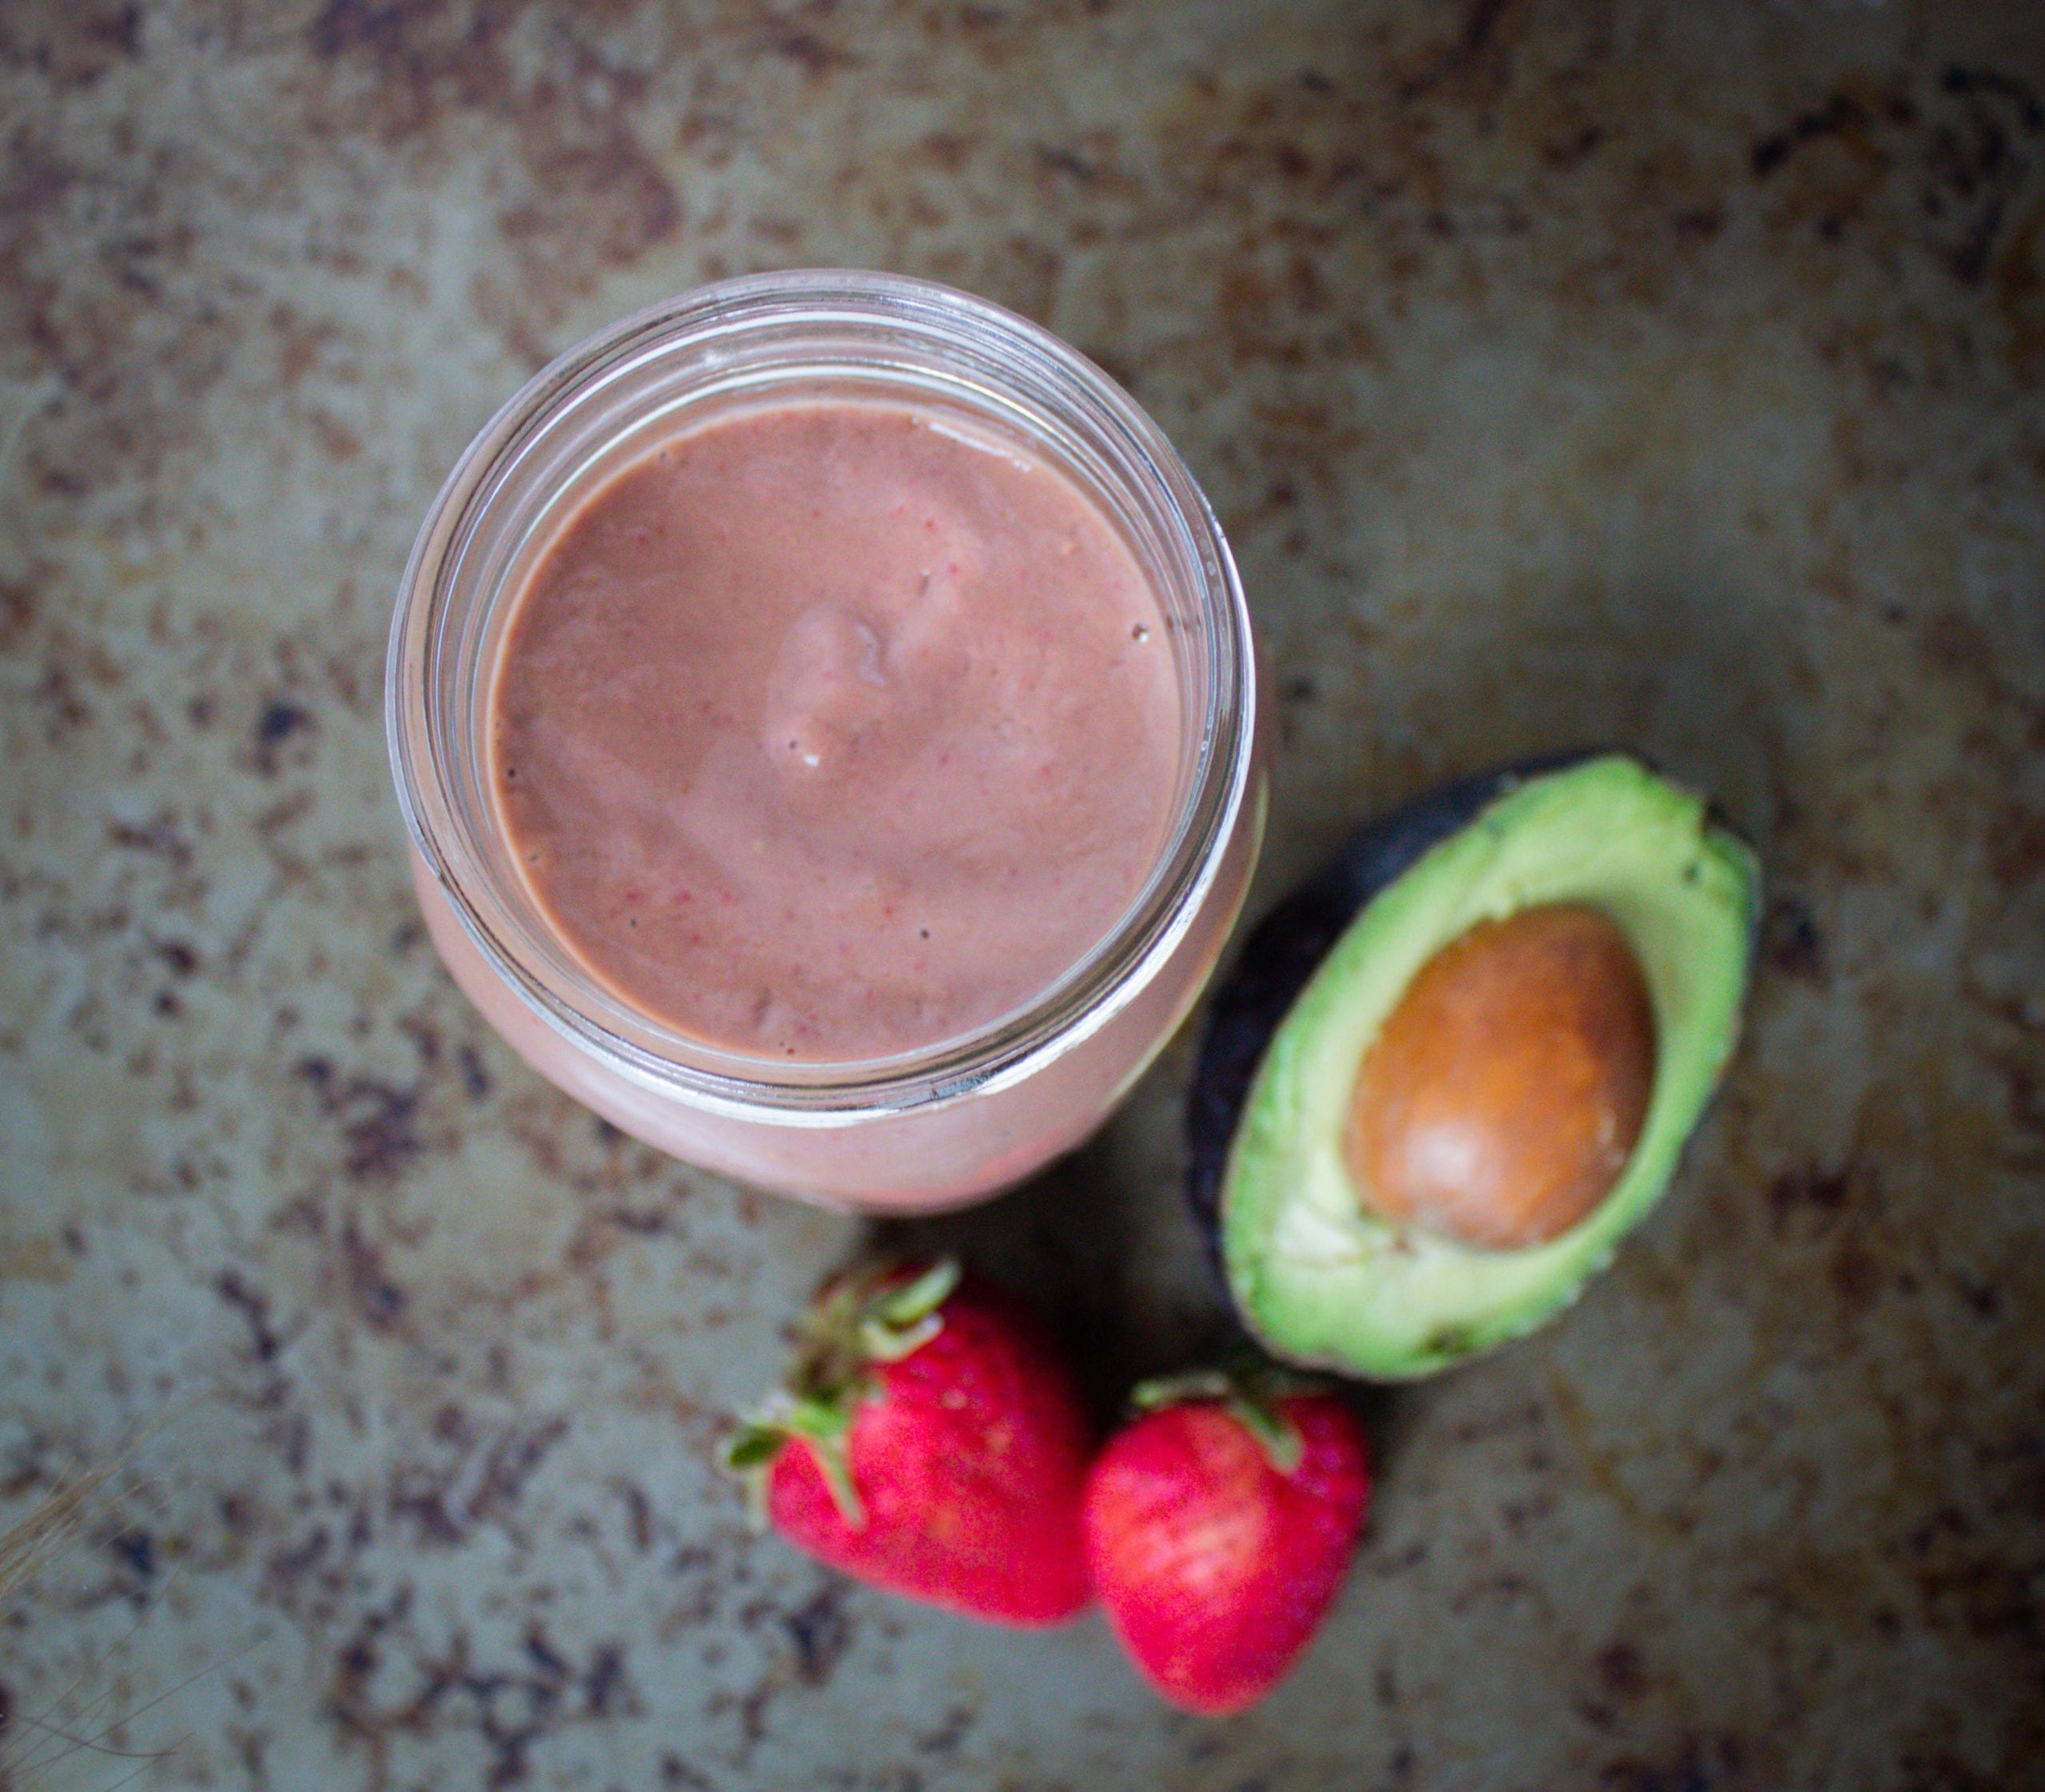 strawberry chocolate smoothie in glass jar with 2 fresh strawberries and 1/2 avocado next to it